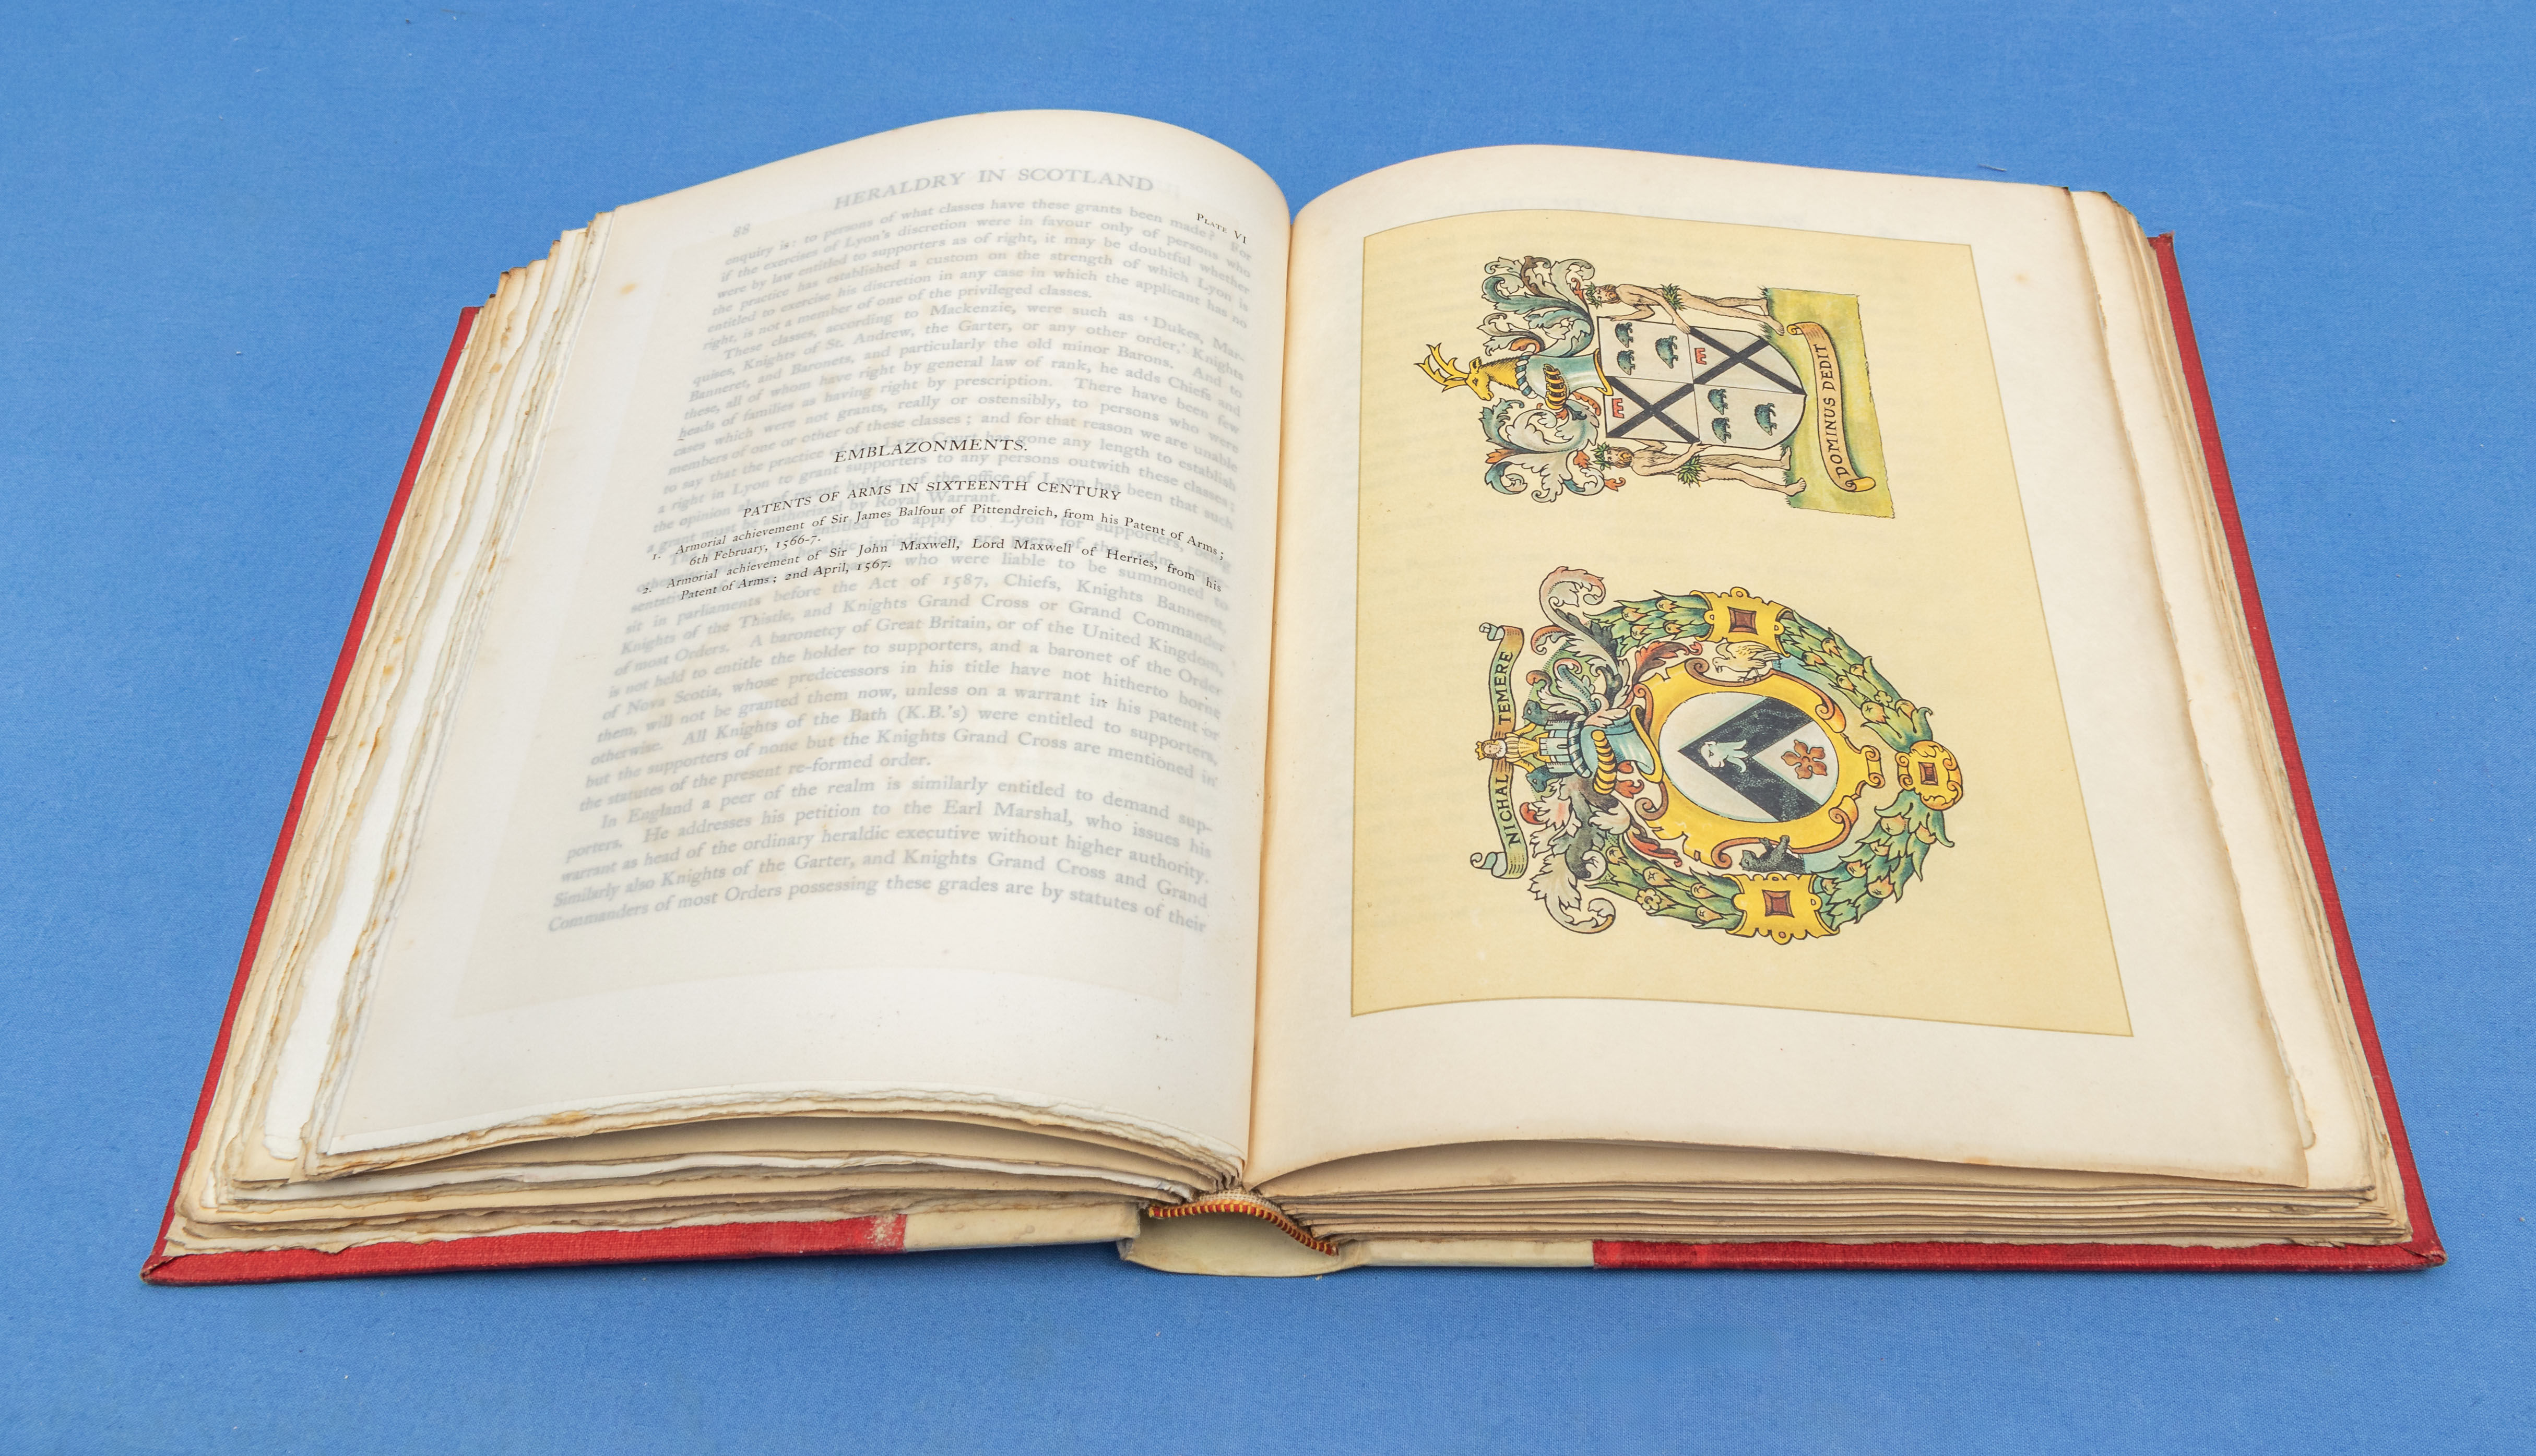 Heraldry in Scotland volumes I and II by J H Stevenson published by James Maclehose and Sons Glasgow - Image 5 of 11